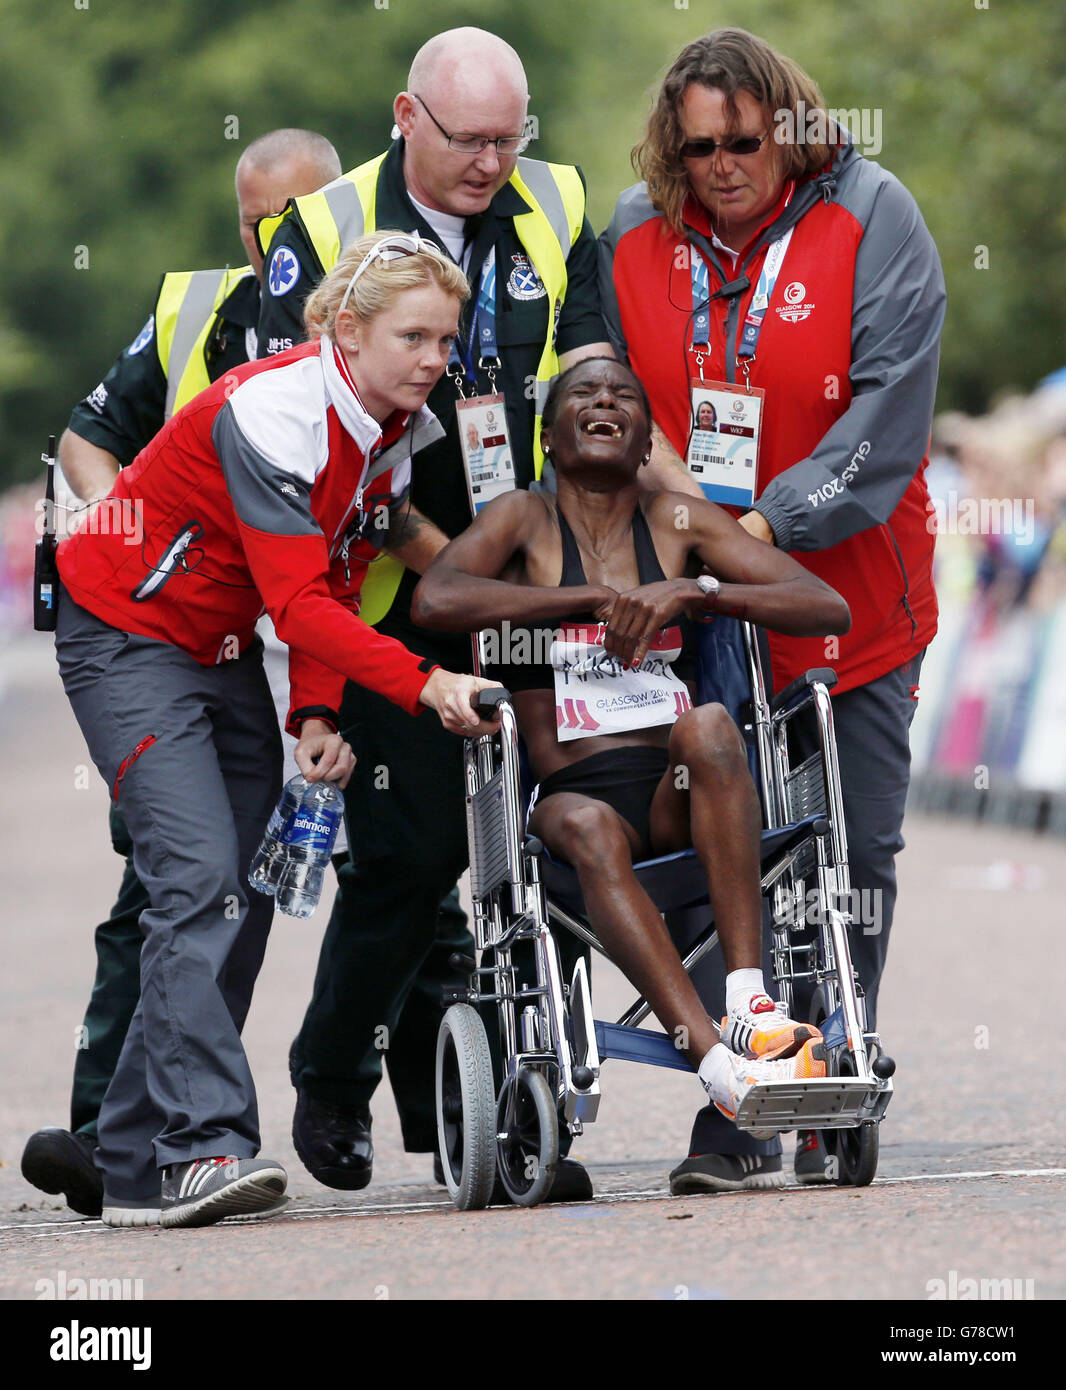 Namibian's Beata Naigambo collapses at the finish line during the 2014 Commonwealth Games in Glasgow during the 2014 Commonwealth Games in Glasgow. Stock Photo